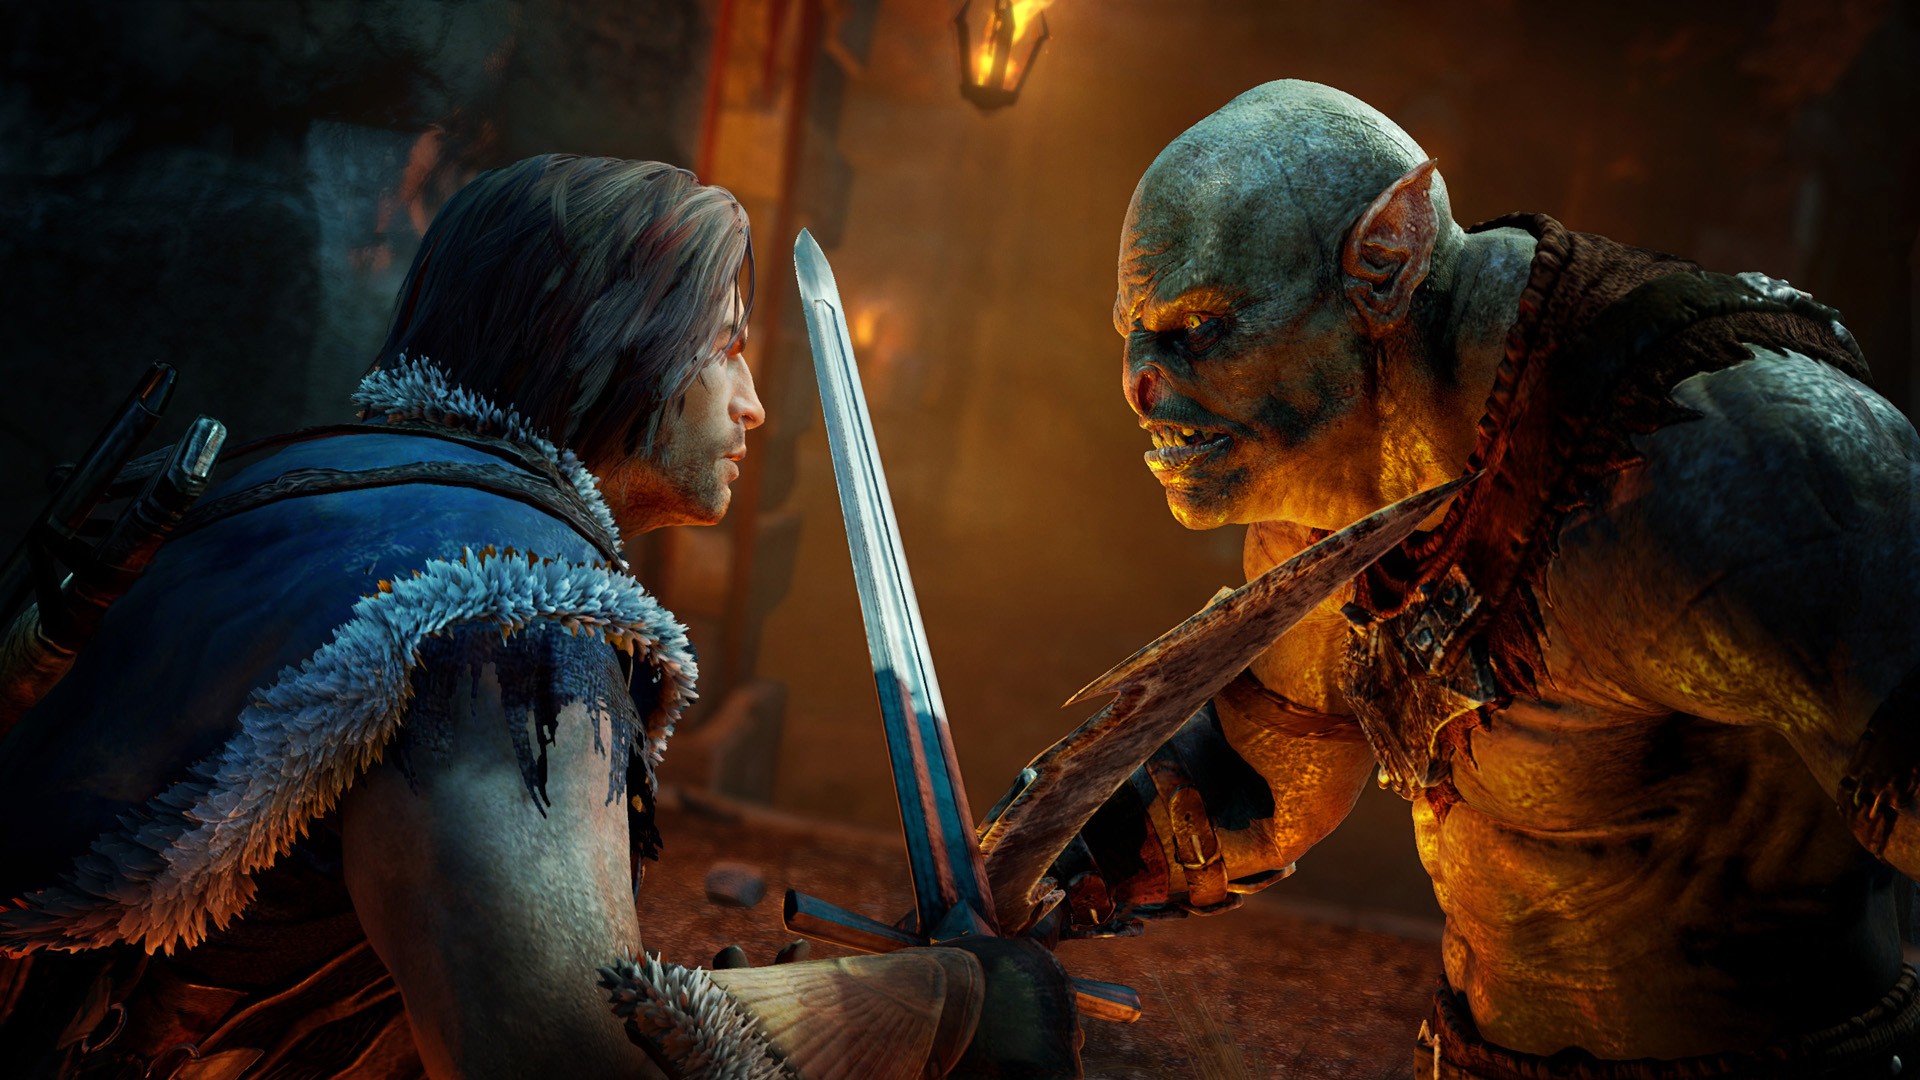 General 1920x1080 Middle-earth: Shadow of Mordor video games sword fantasy art PC gaming